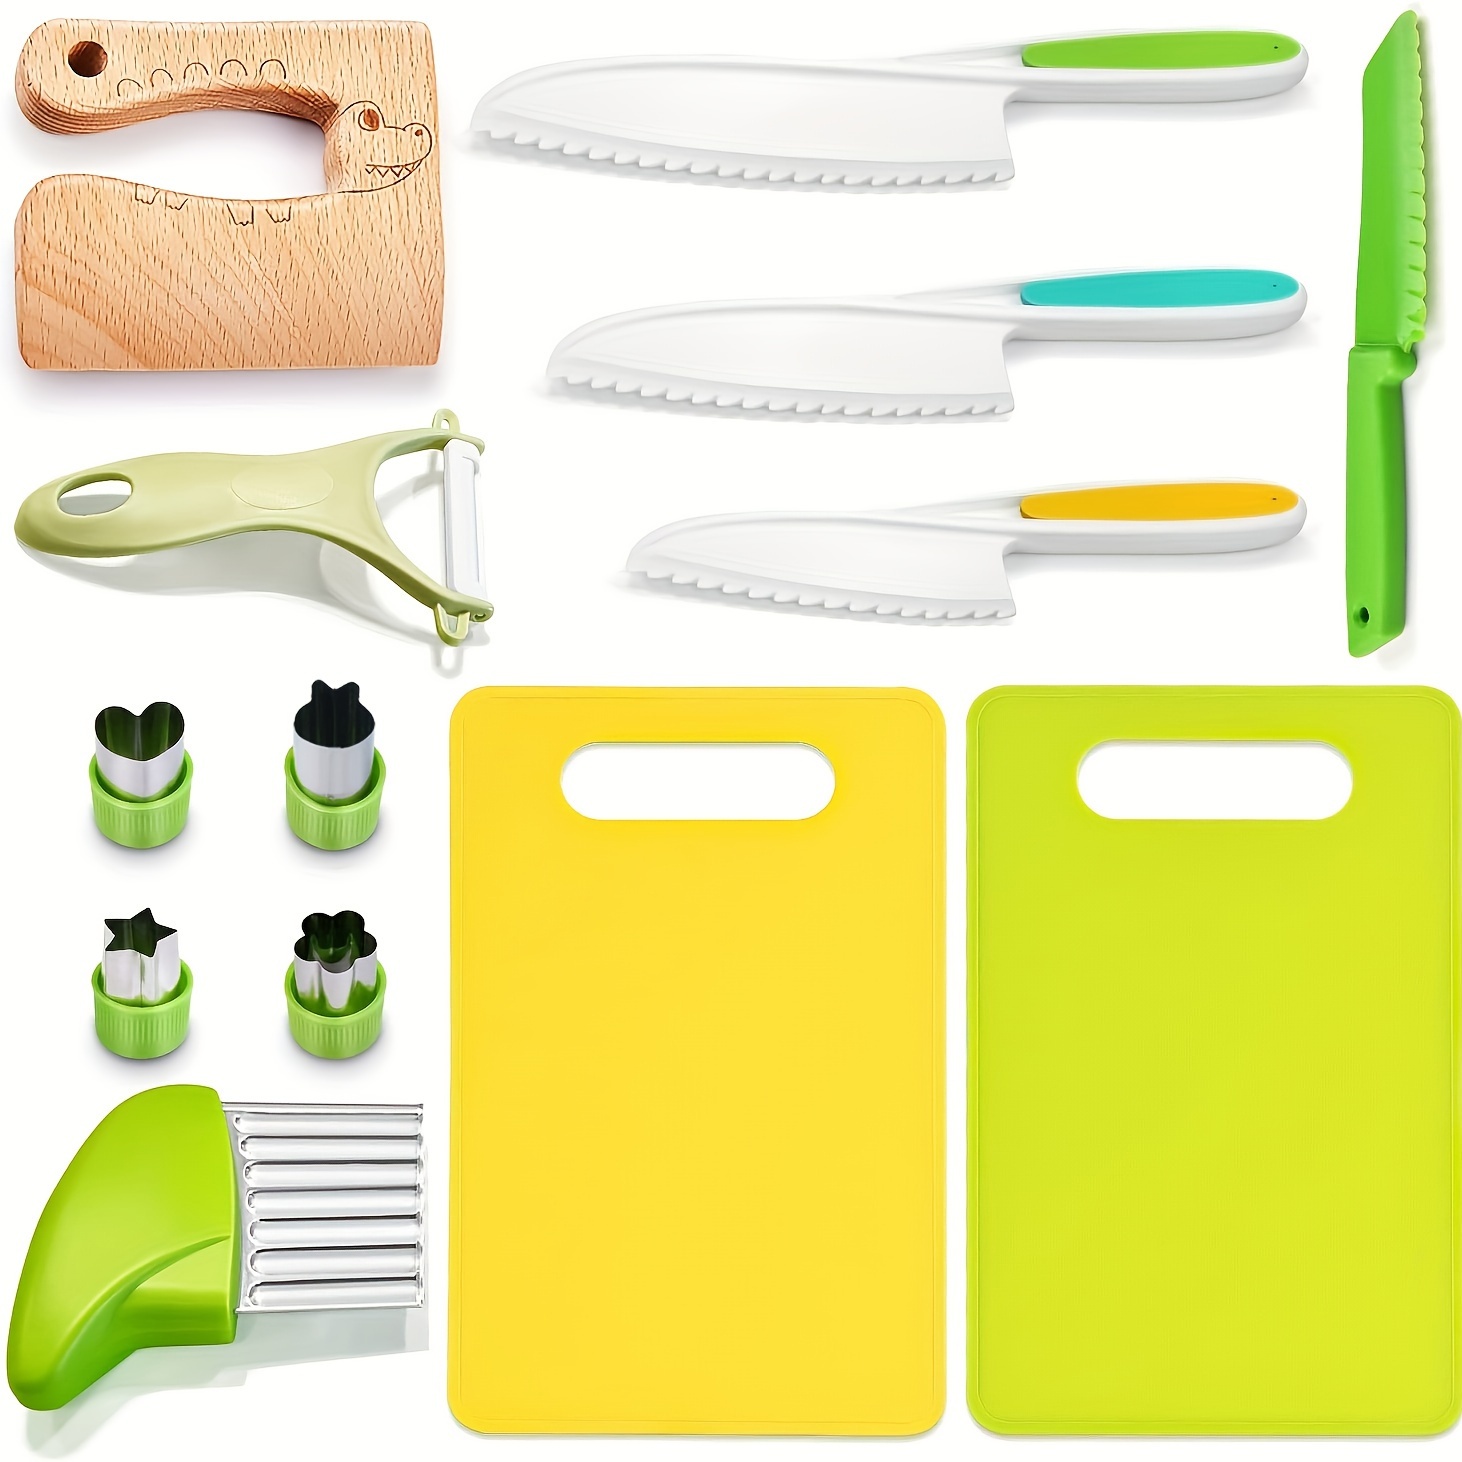 Kids Cooking Knife Set - Toddler Kitchen Cutter With Crinkle